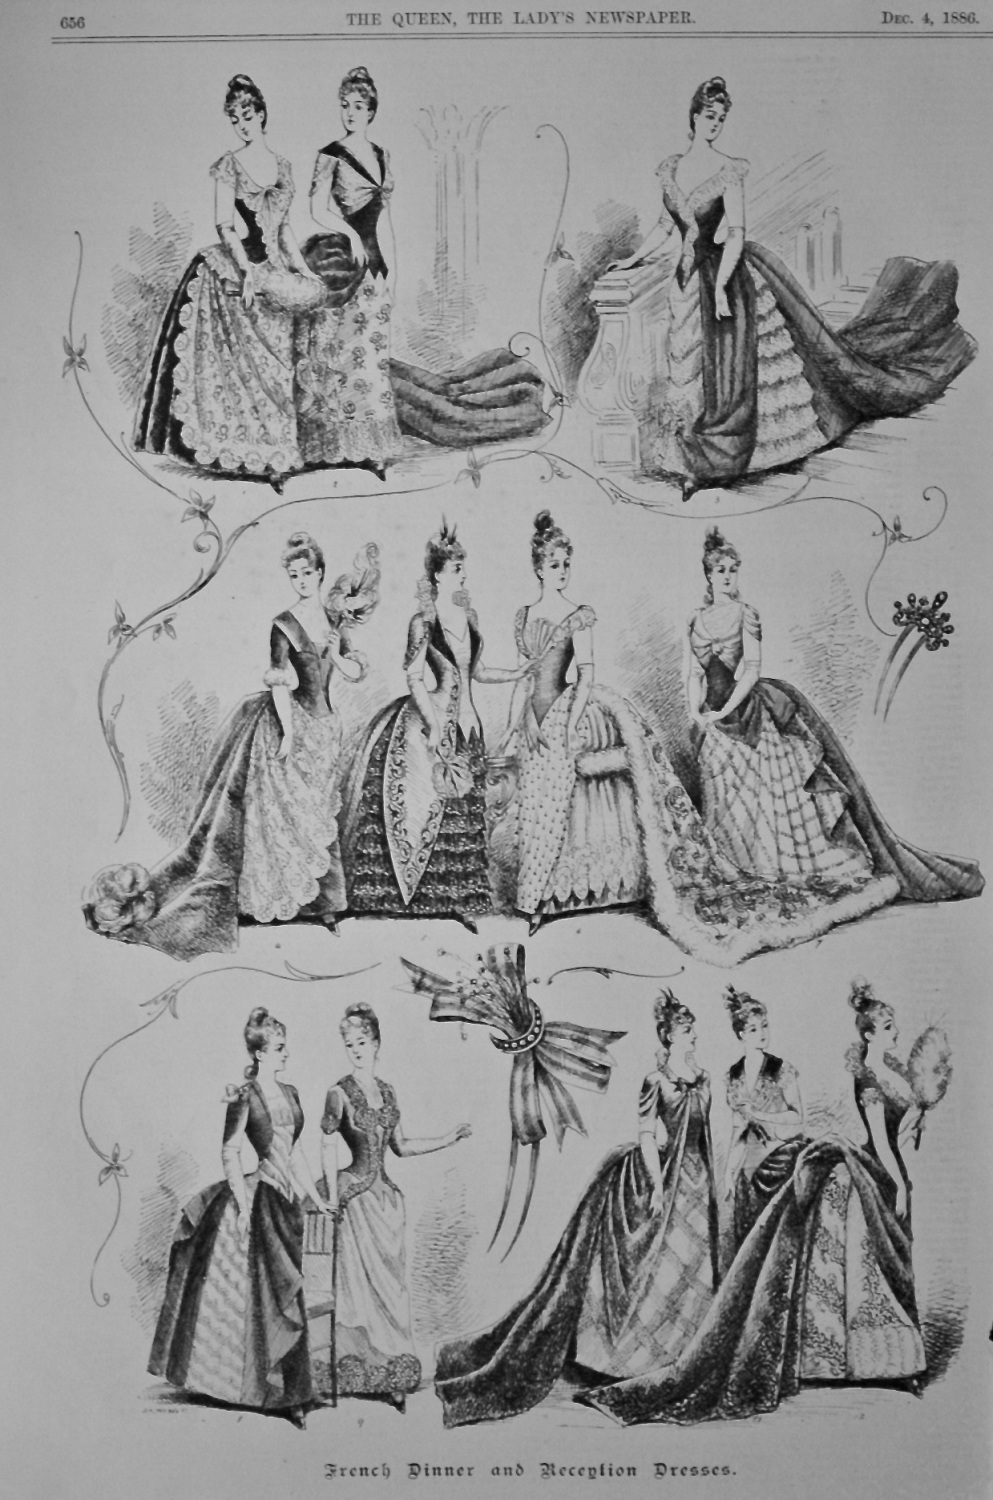 French Dinner and Reception Dresses.  1886.